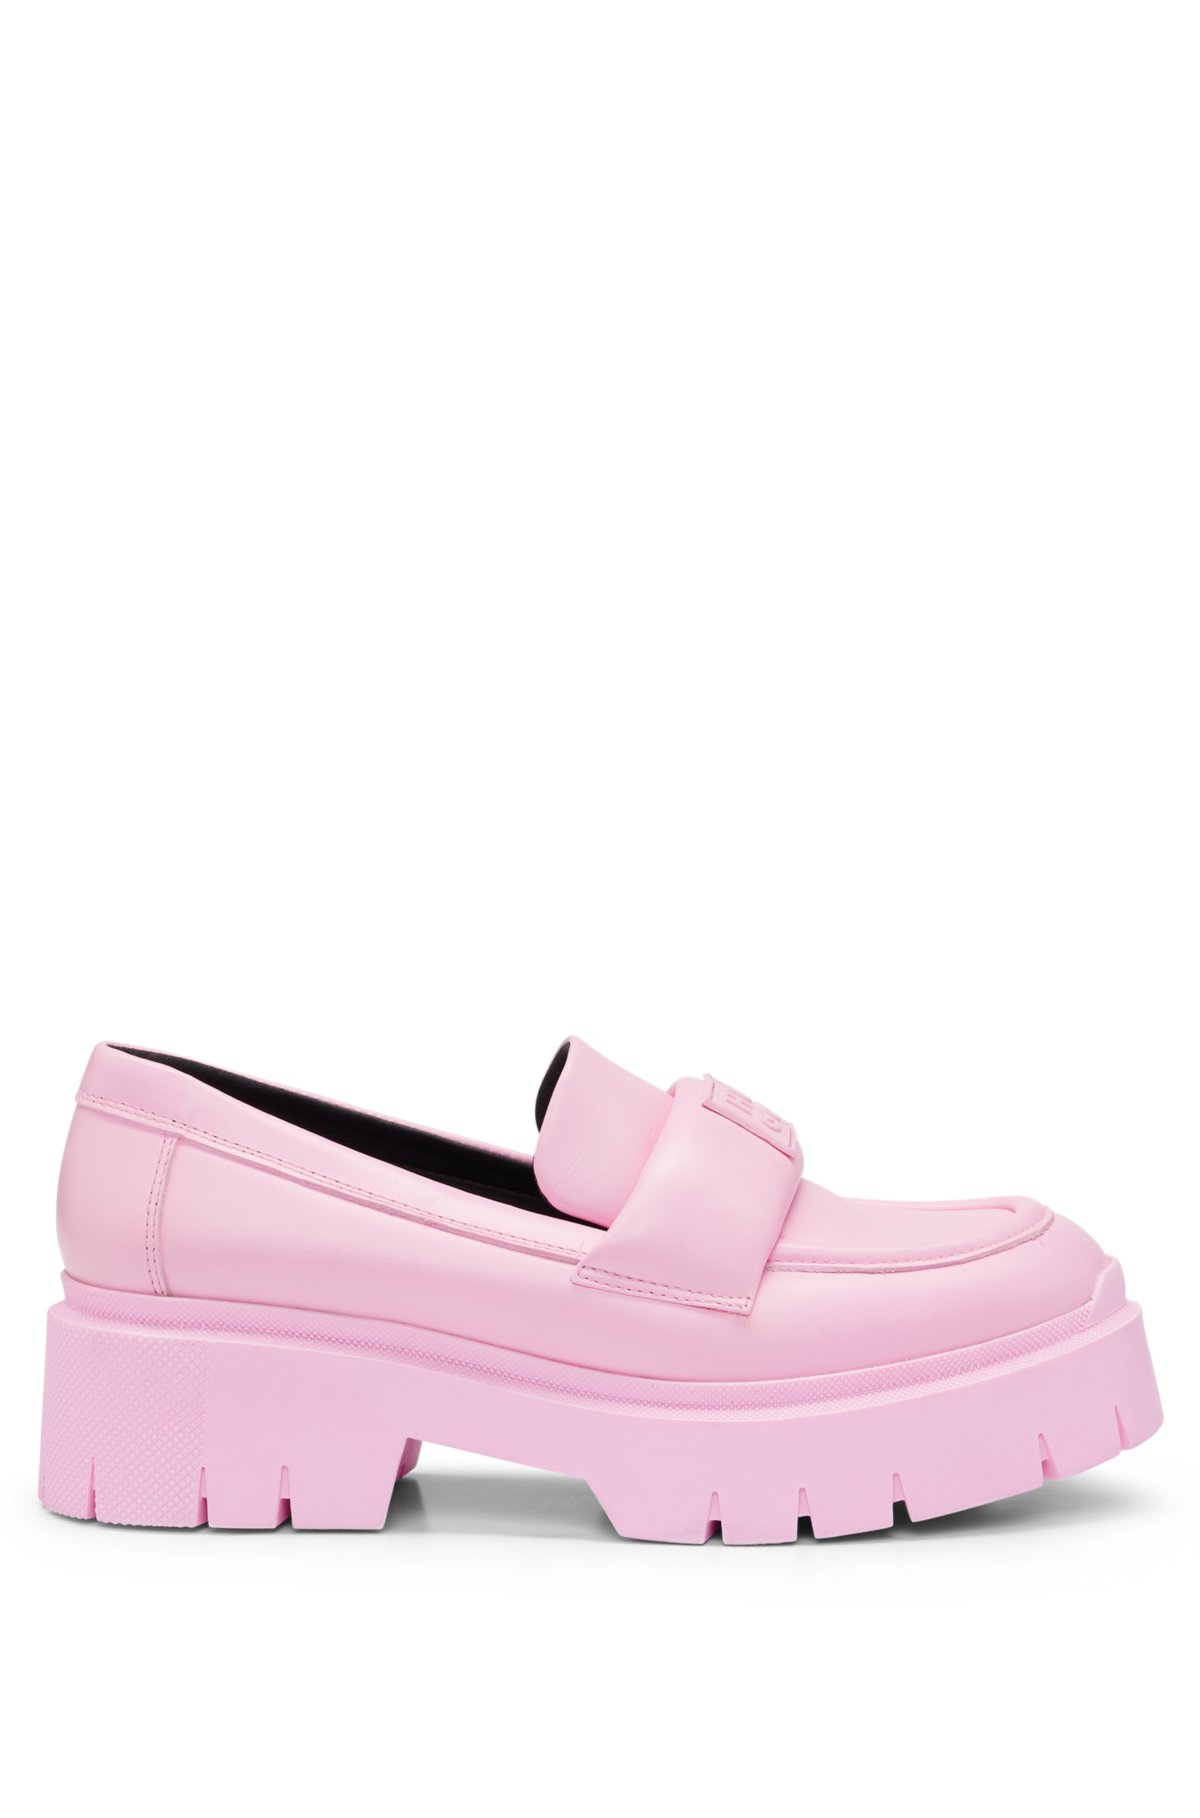 Leather loafers with platform sole and branded strap, light pink